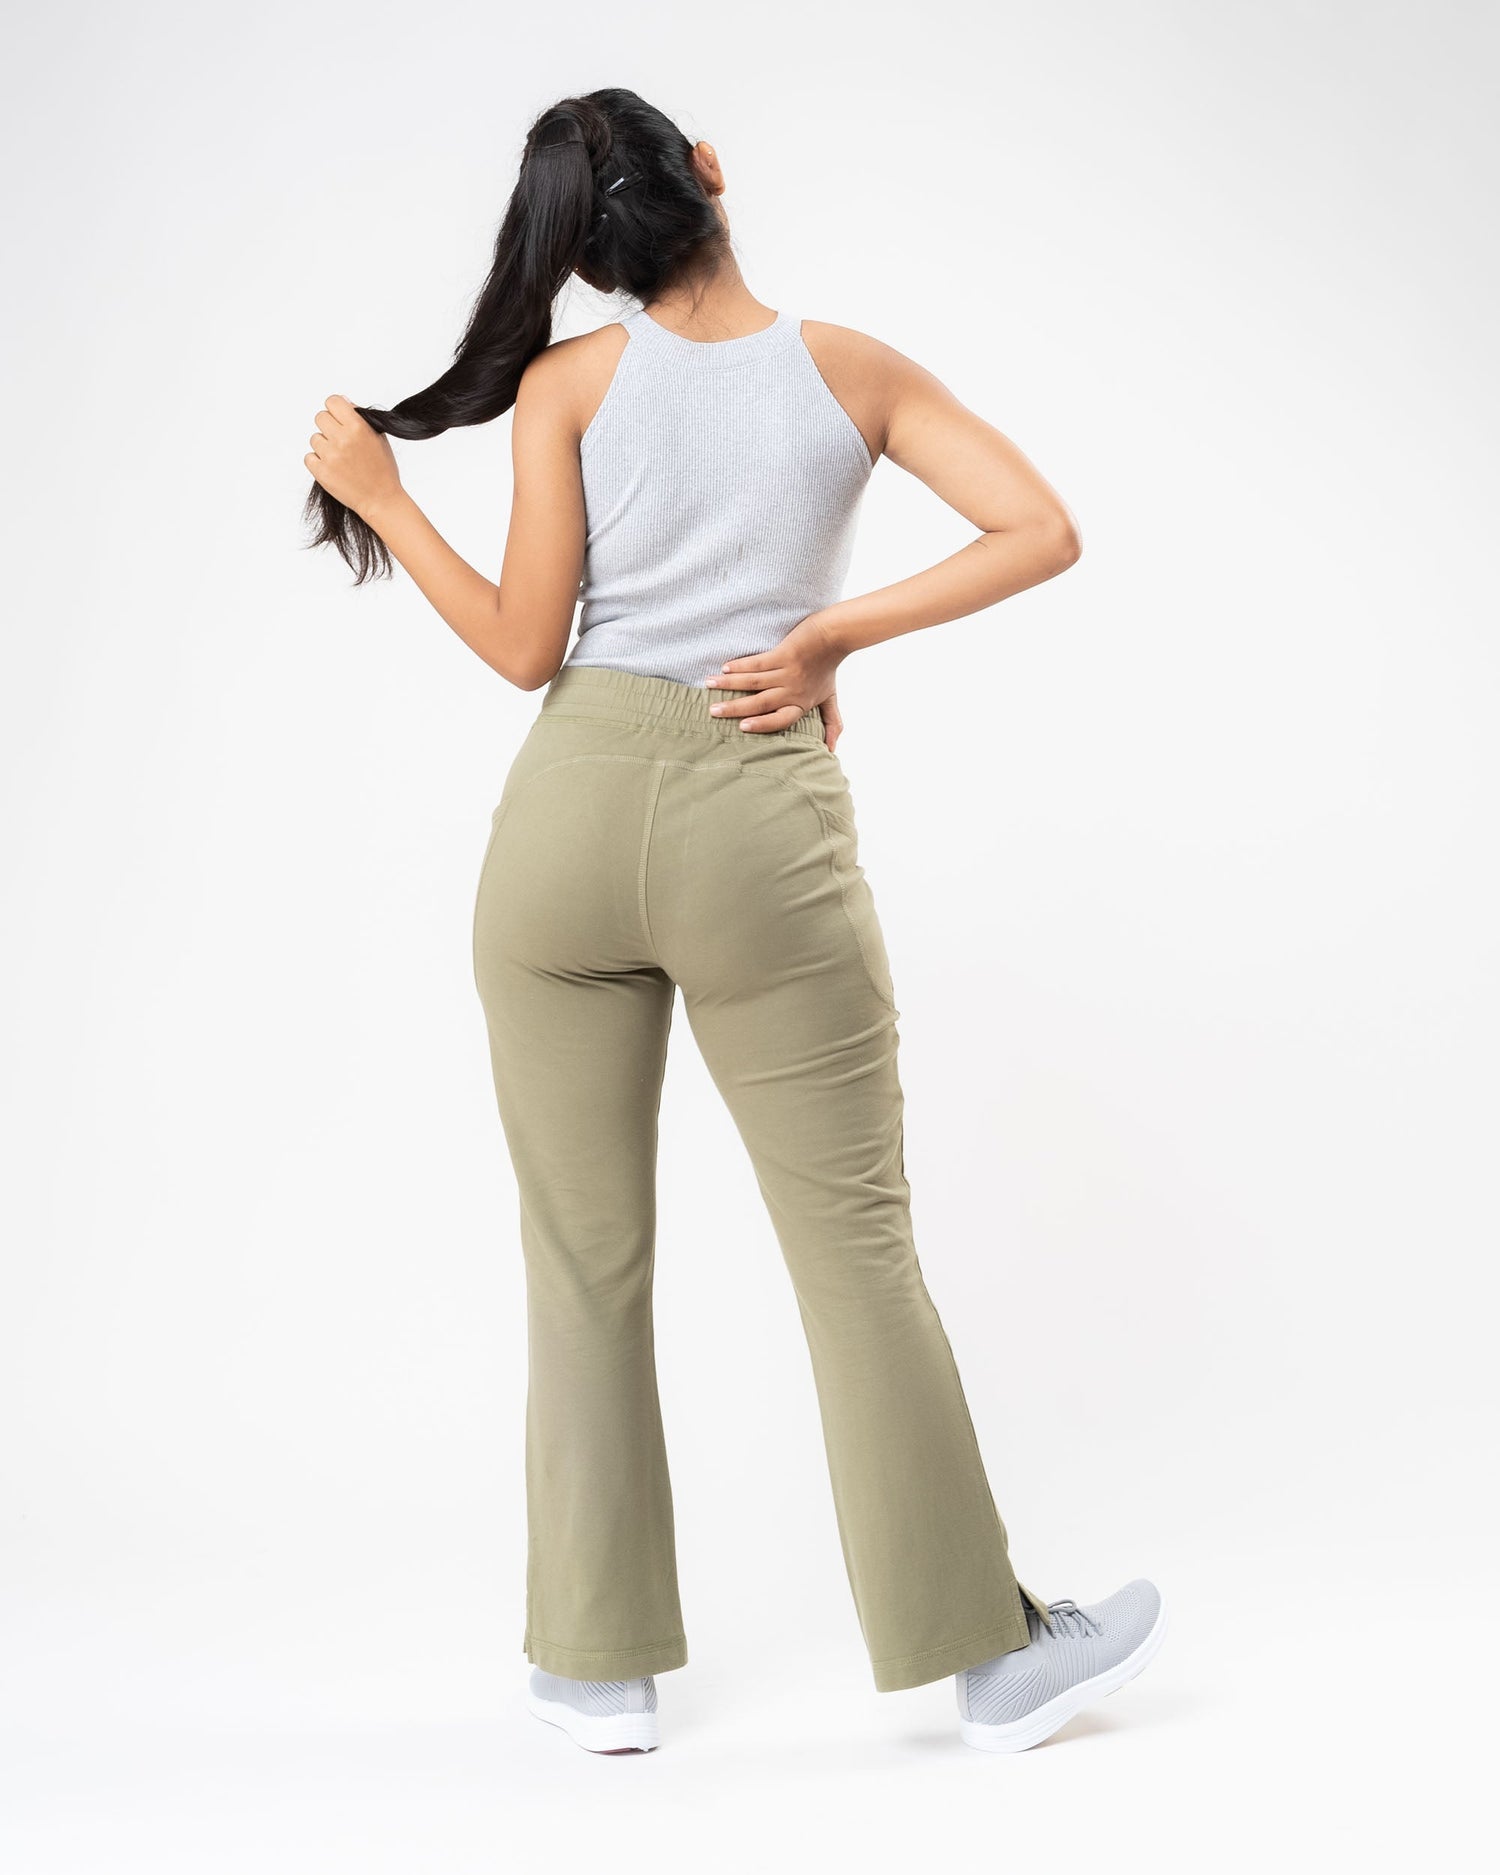 Olive Green Comfort Organic Cotton Pants For Women – Cuttlefish